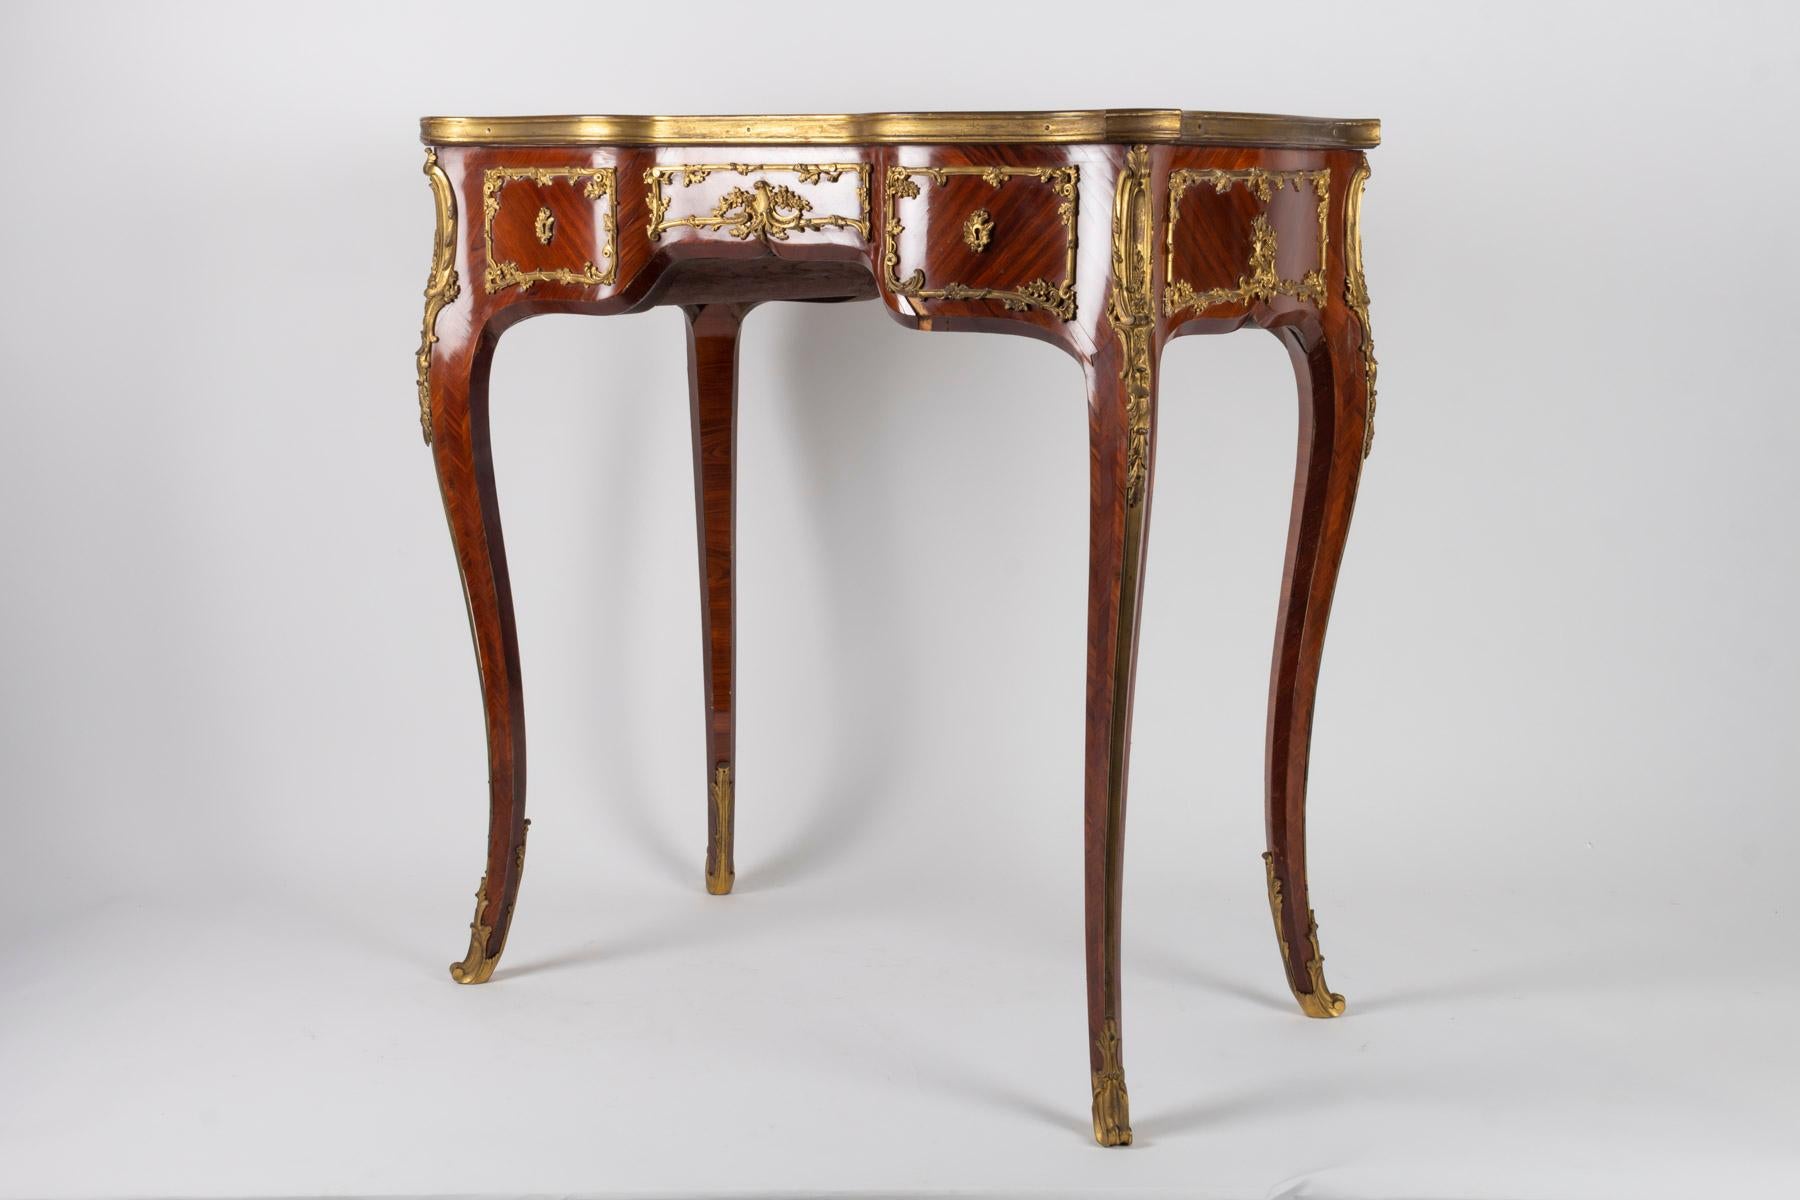 French Napoleon III Era Desk, Louis XV Style, 1880, Signed Lucien Roulin